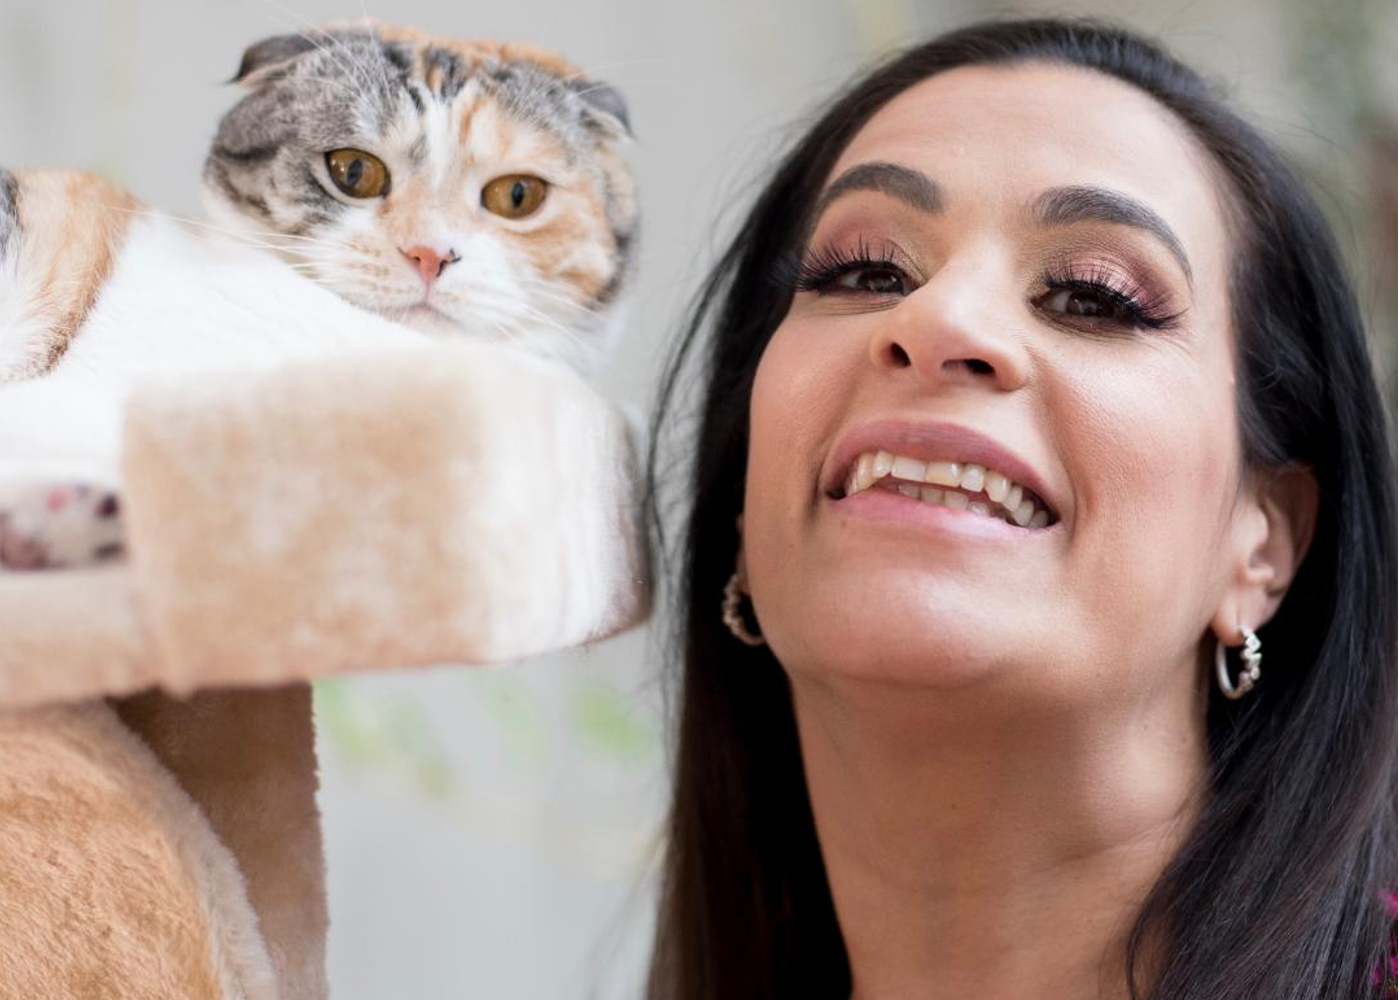 Maysoon smiling next to her cat, Beyonce